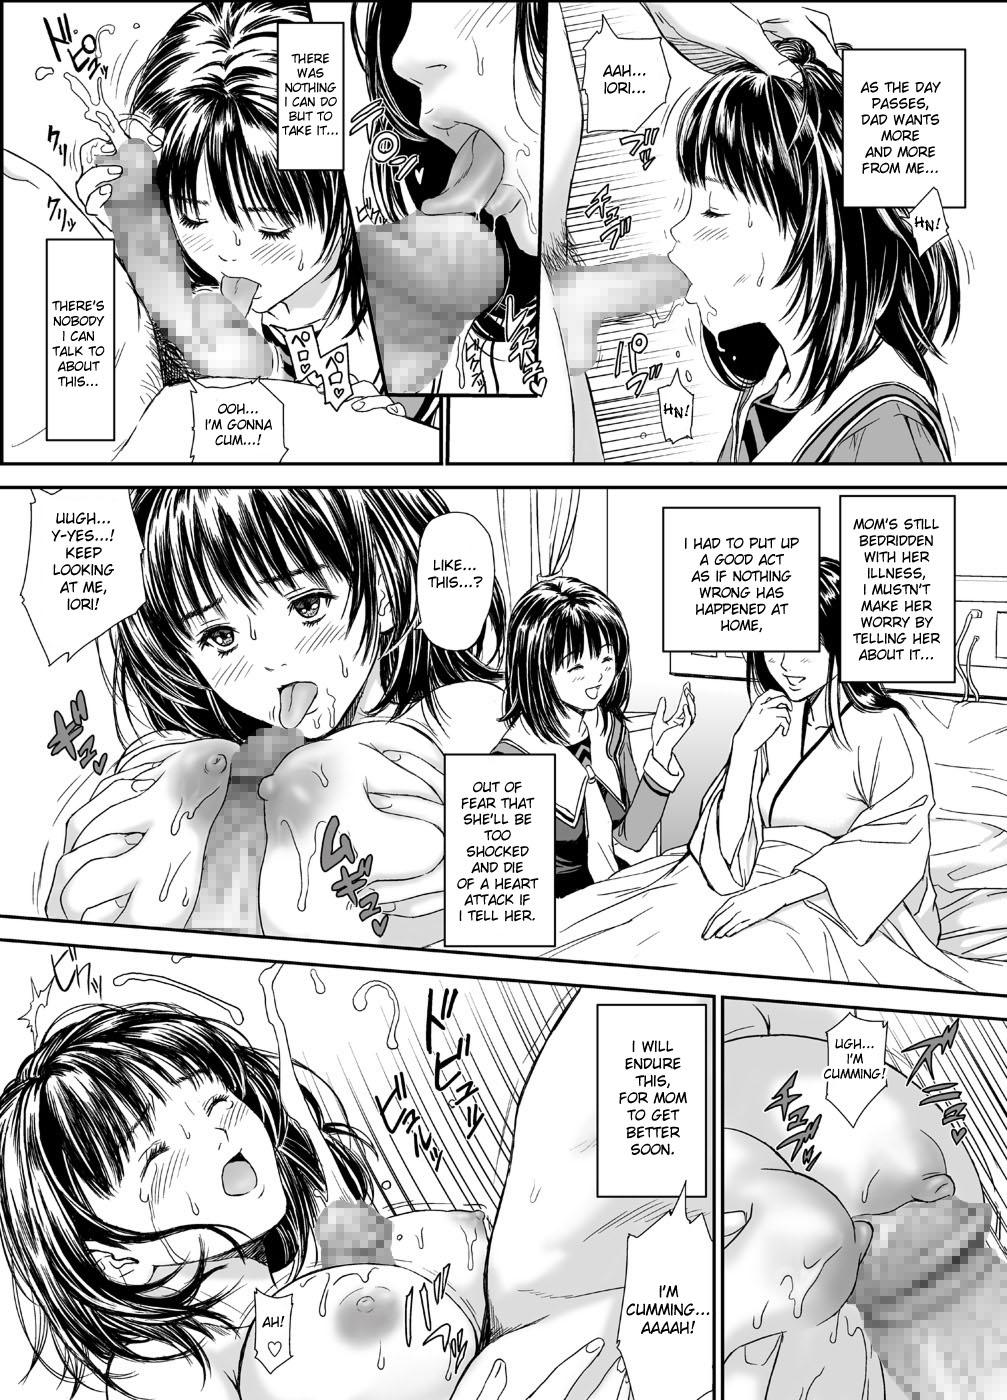 Toys Iori - The Dark Side Of That Girl - Is Puba - Page 12